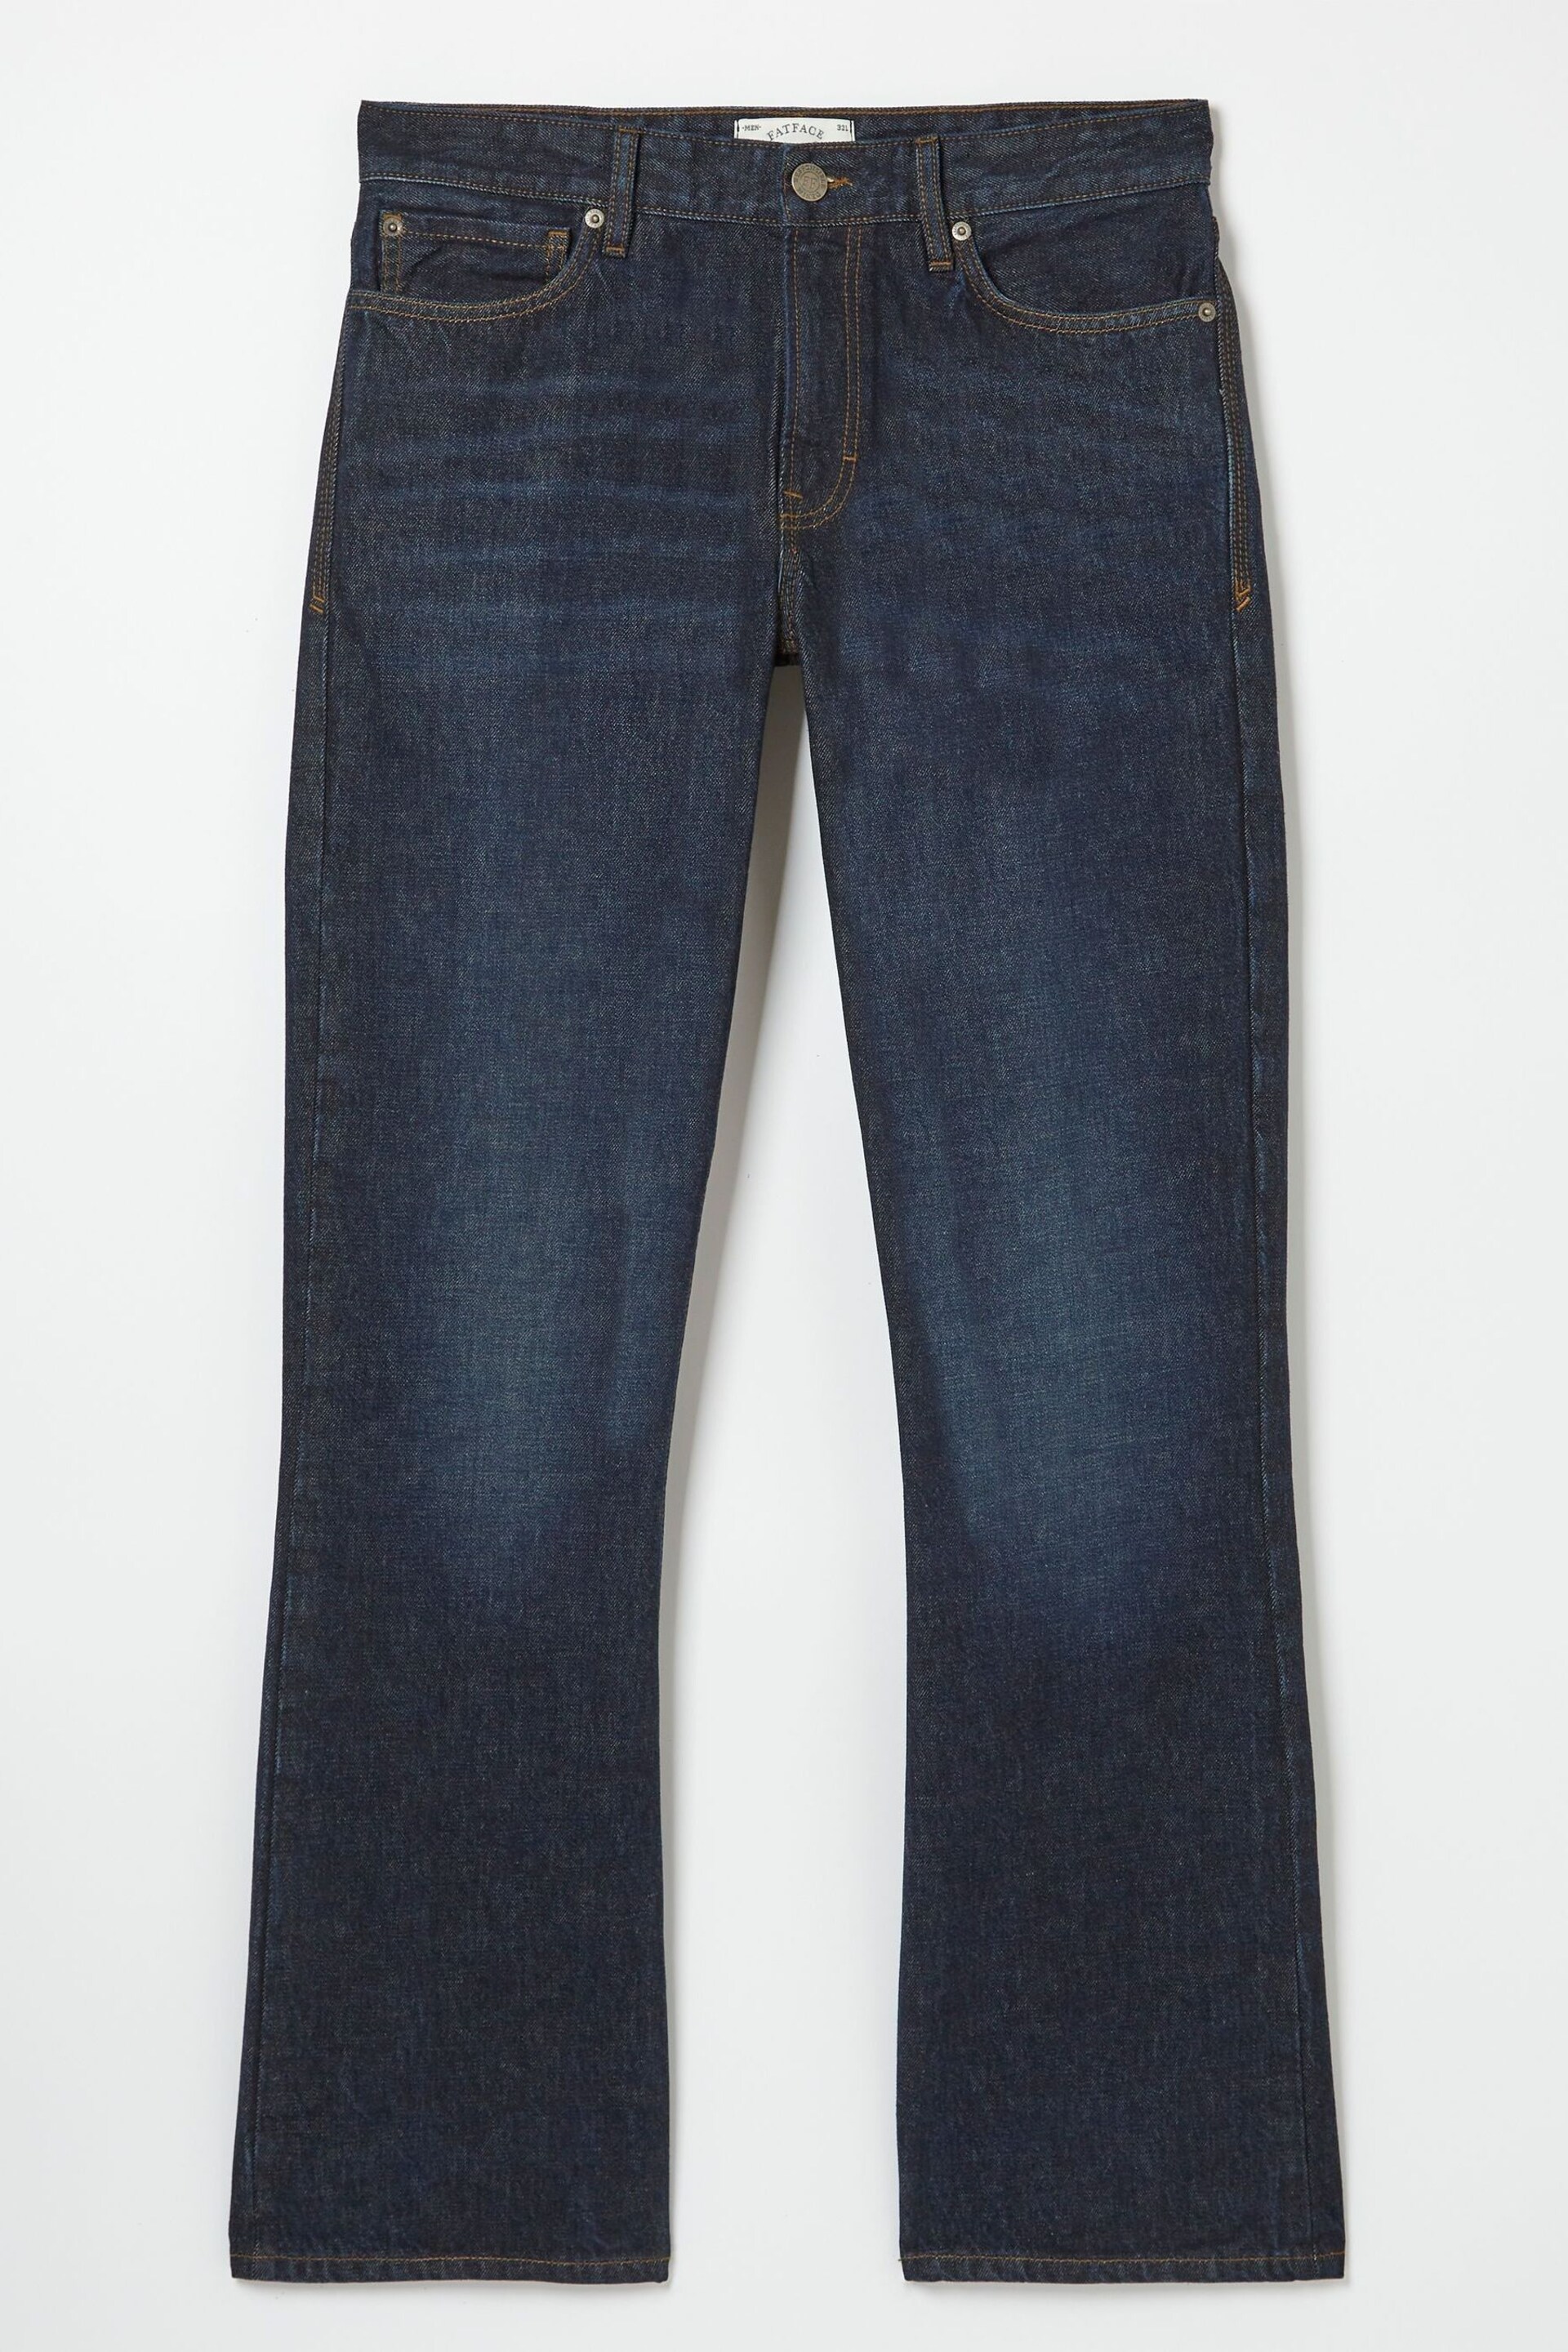 FatFace Denim Navy Bootcut Jeans - Image 5 of 5